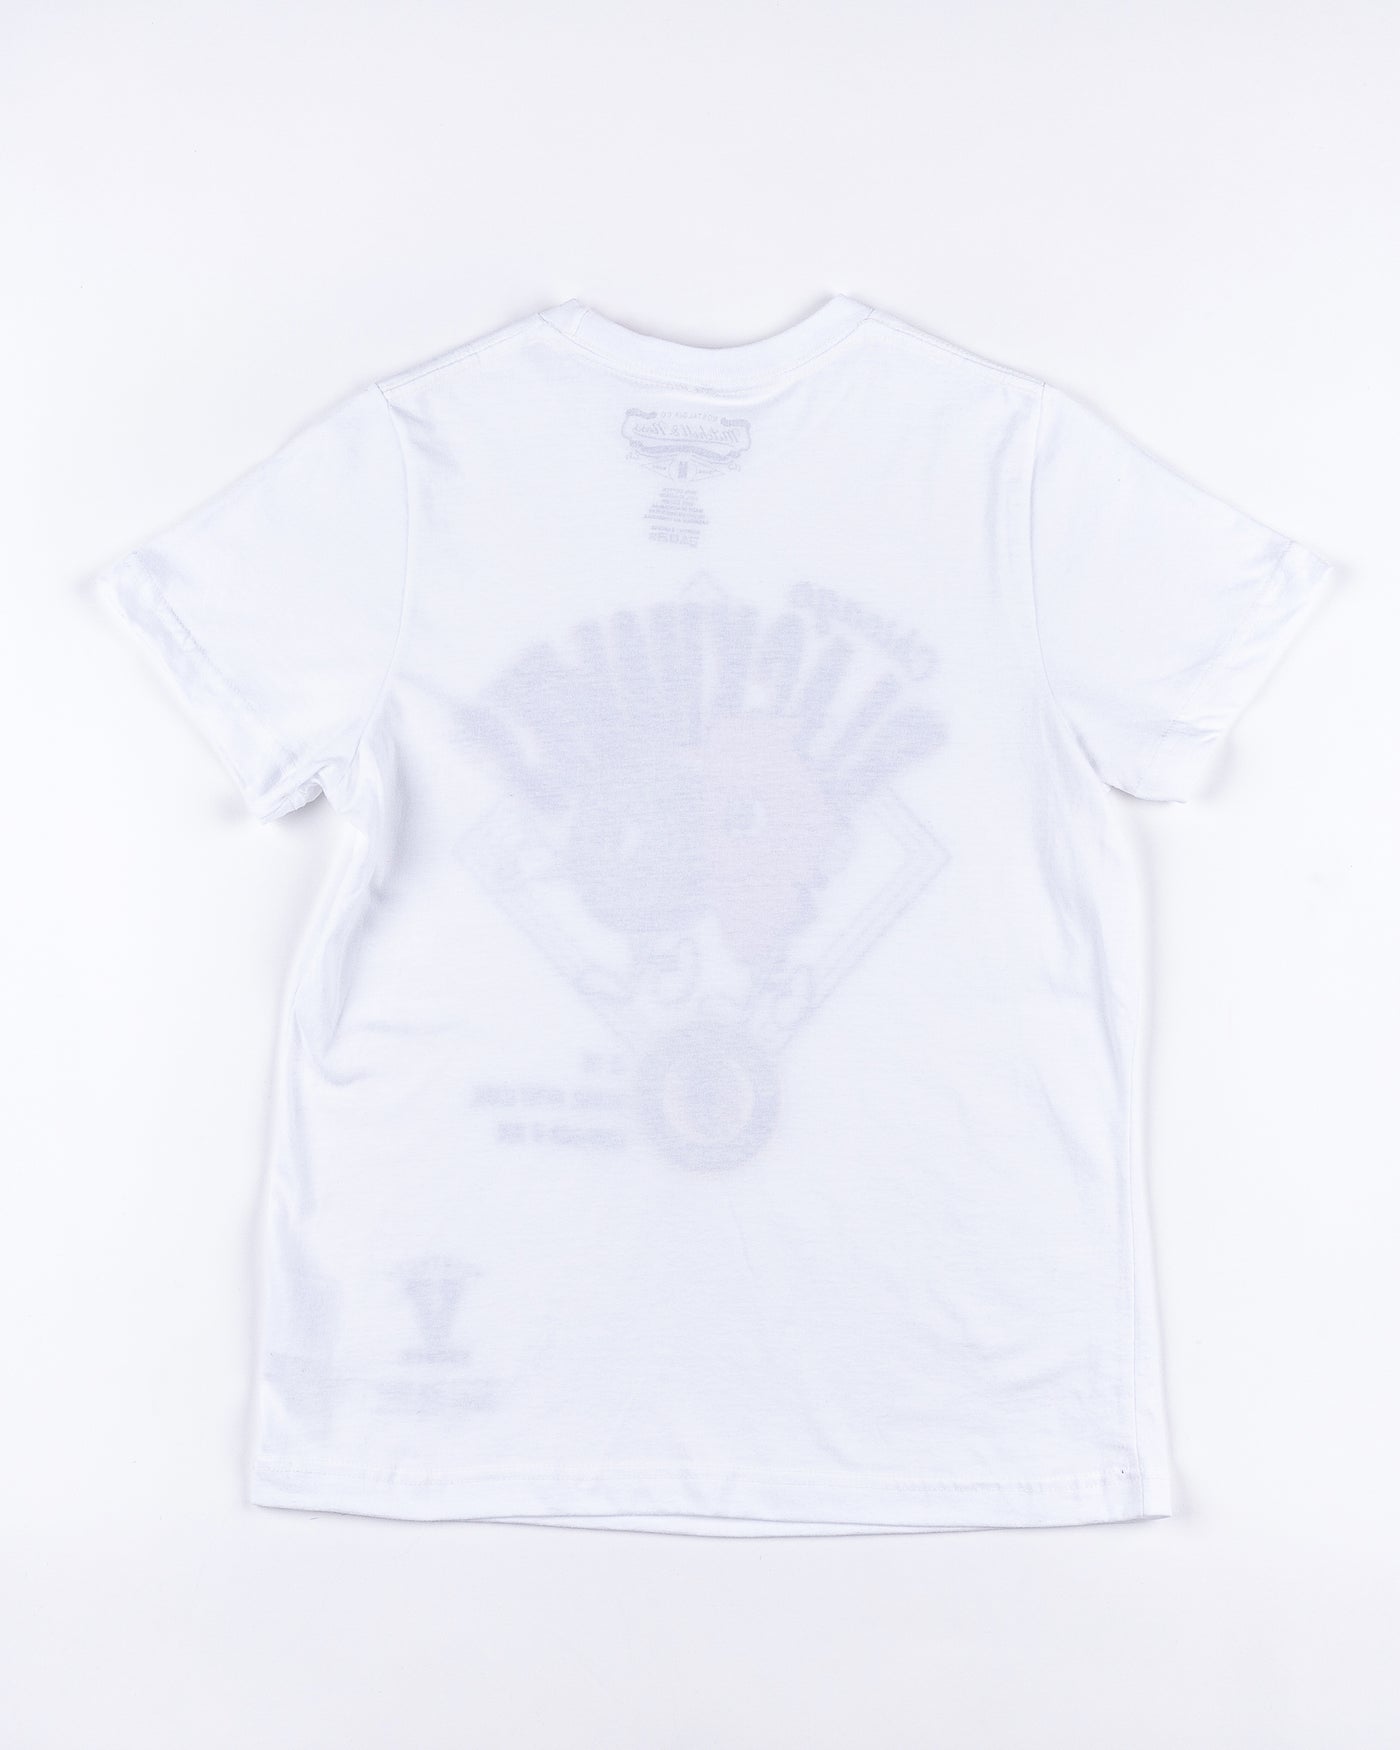 white Mitchell & Ness youth short sleeve tee with Chicago Blackhawks graphic and vintage logo - back lay flat